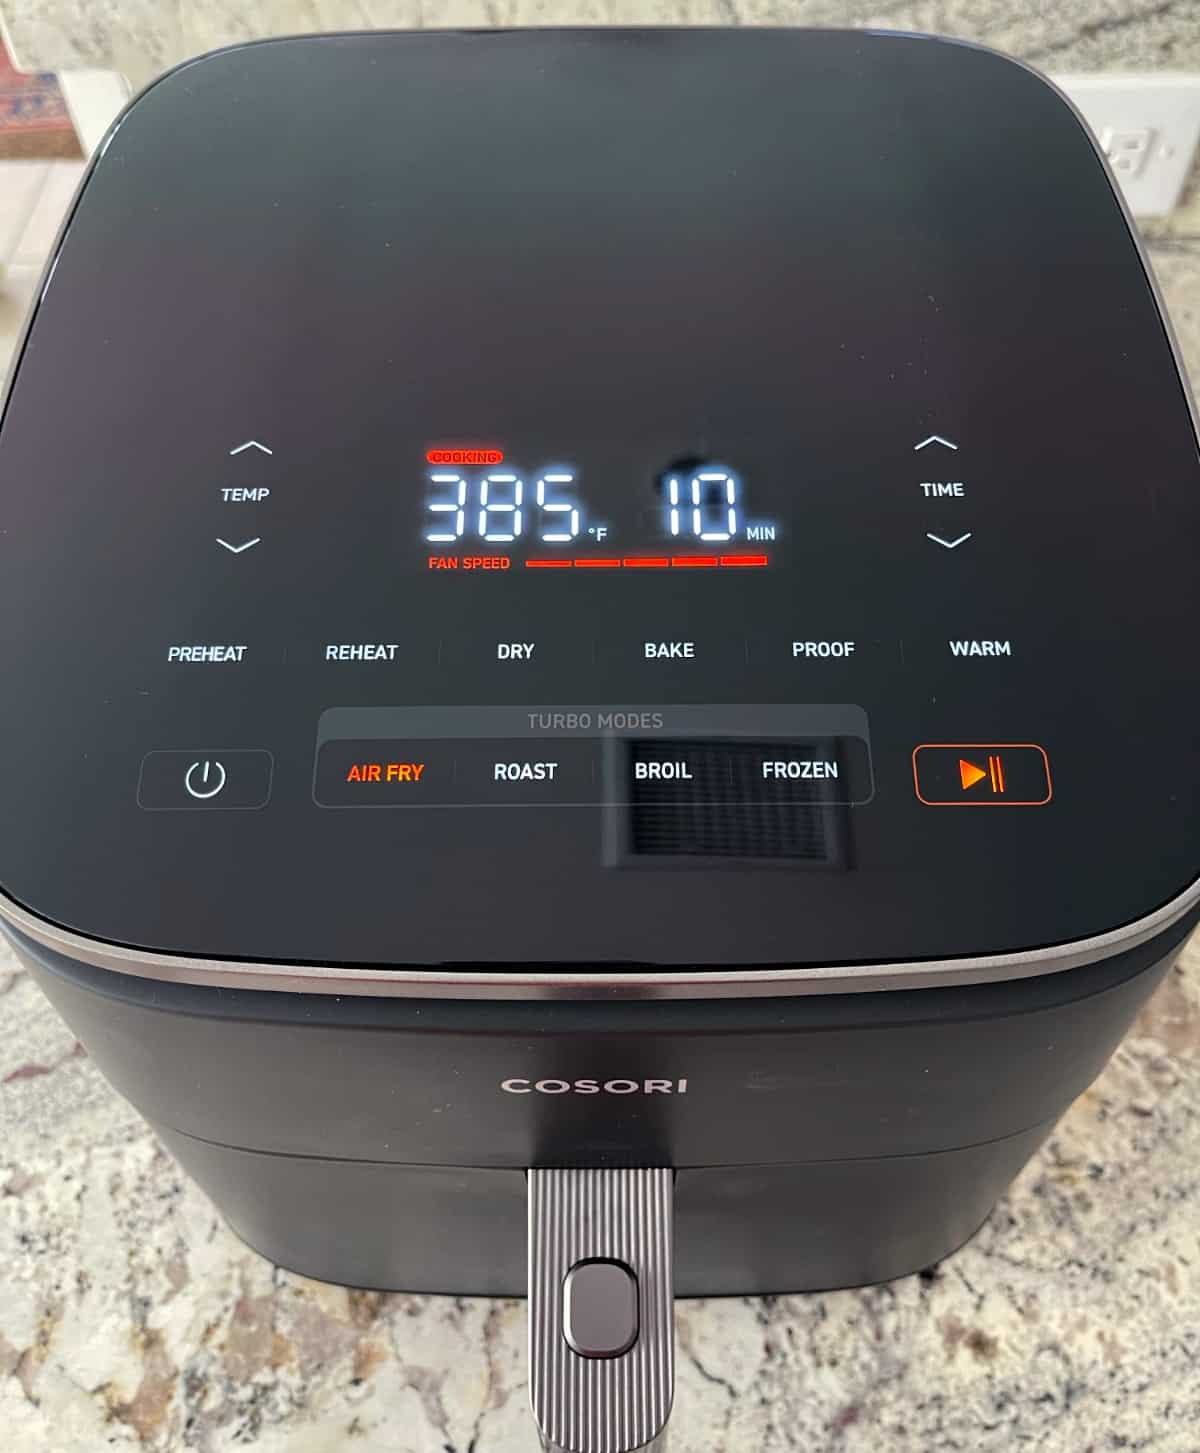 Cosori TurboBlaze set to cook on Air Fry mode for 10 minutes at 385F degrees.